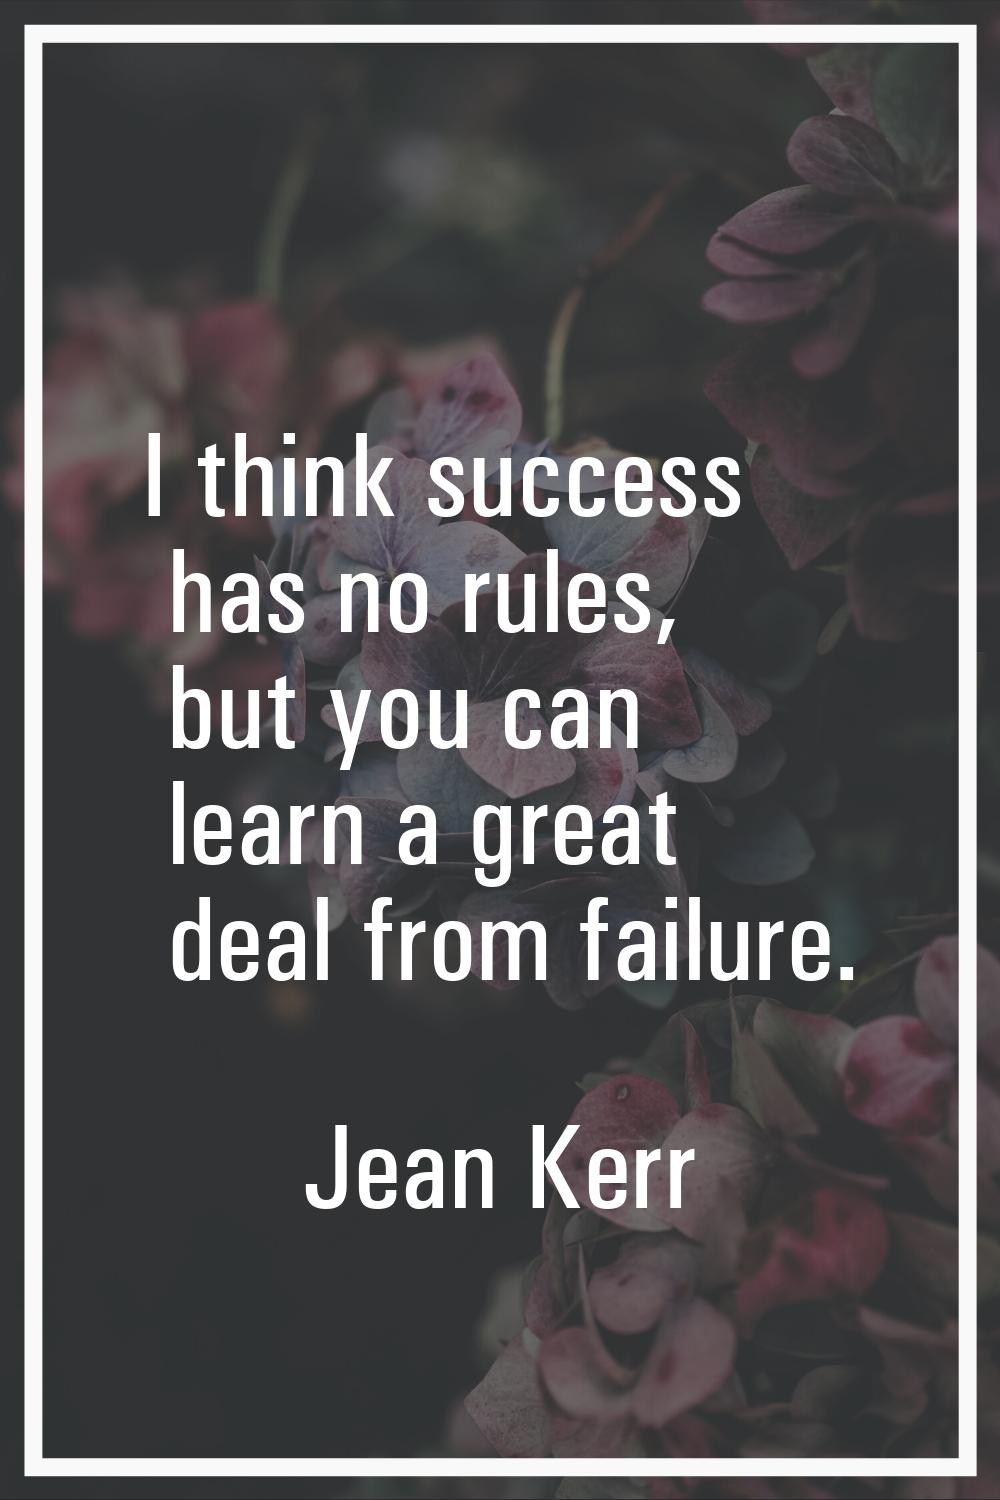 I think success has no rules, but you can learn a great deal from failure.